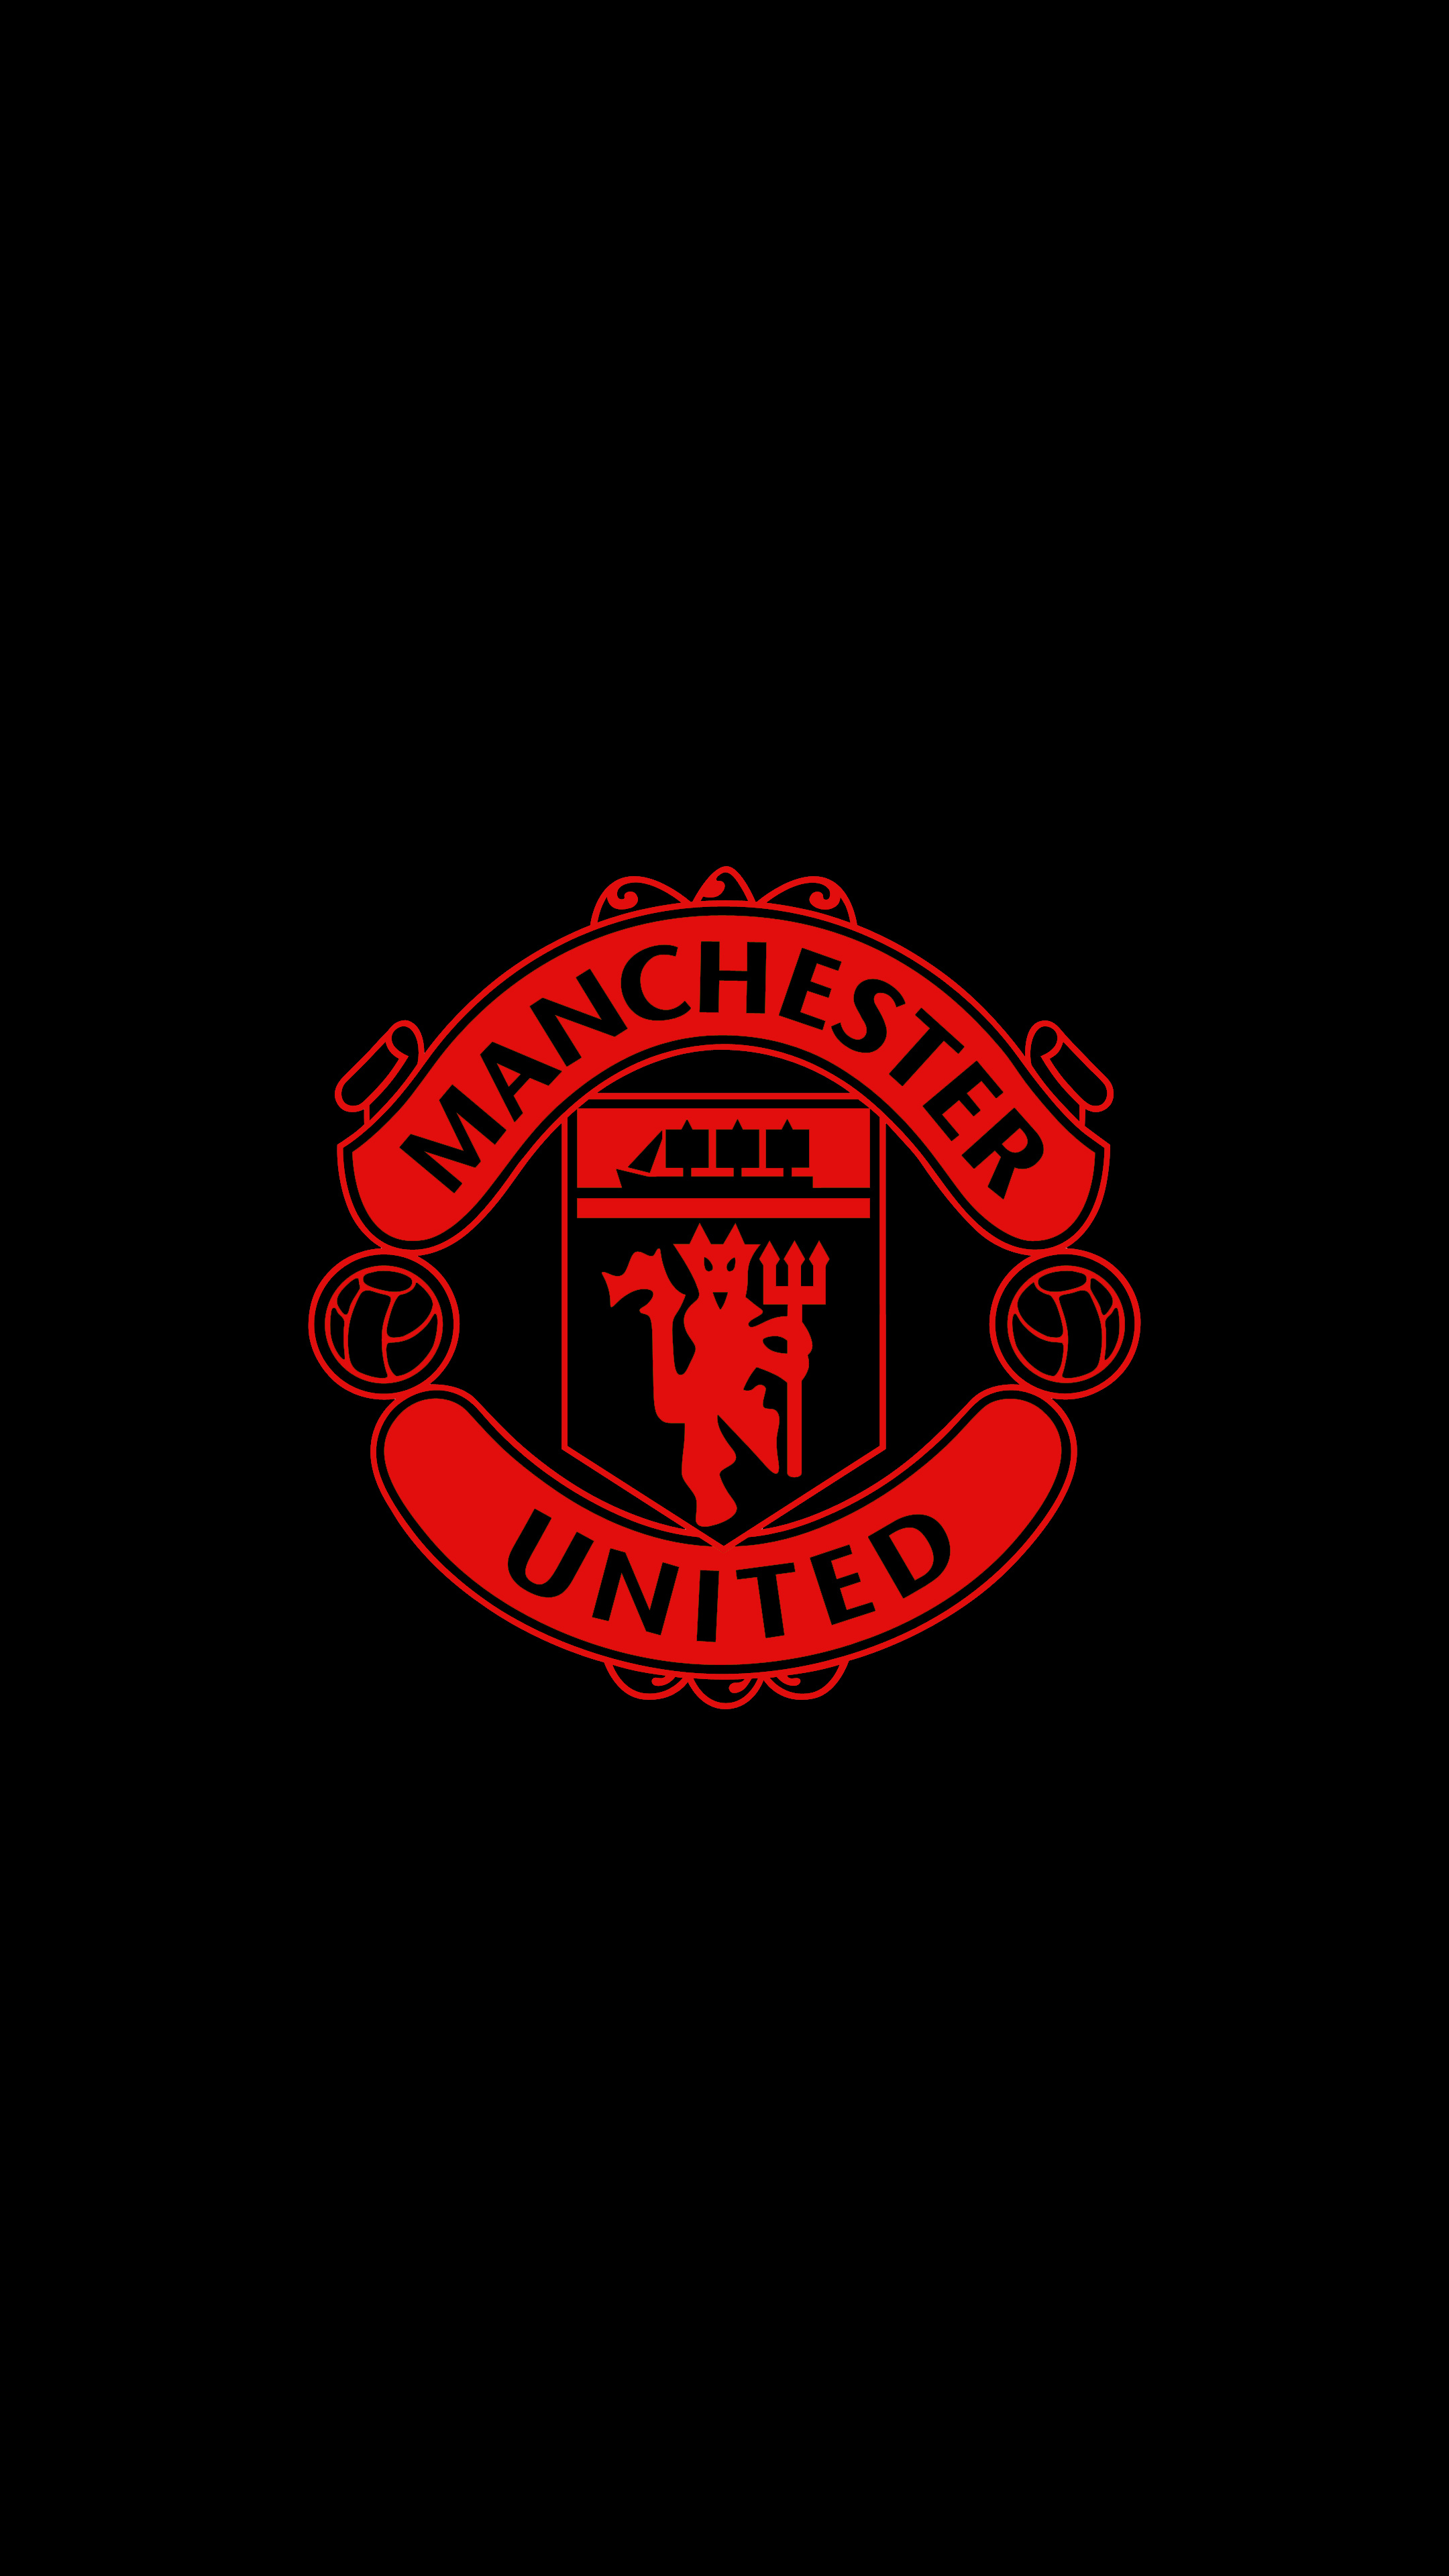 Manchester United: A professional football club based in Old Trafford, England. 2160x3840 4K Wallpaper.